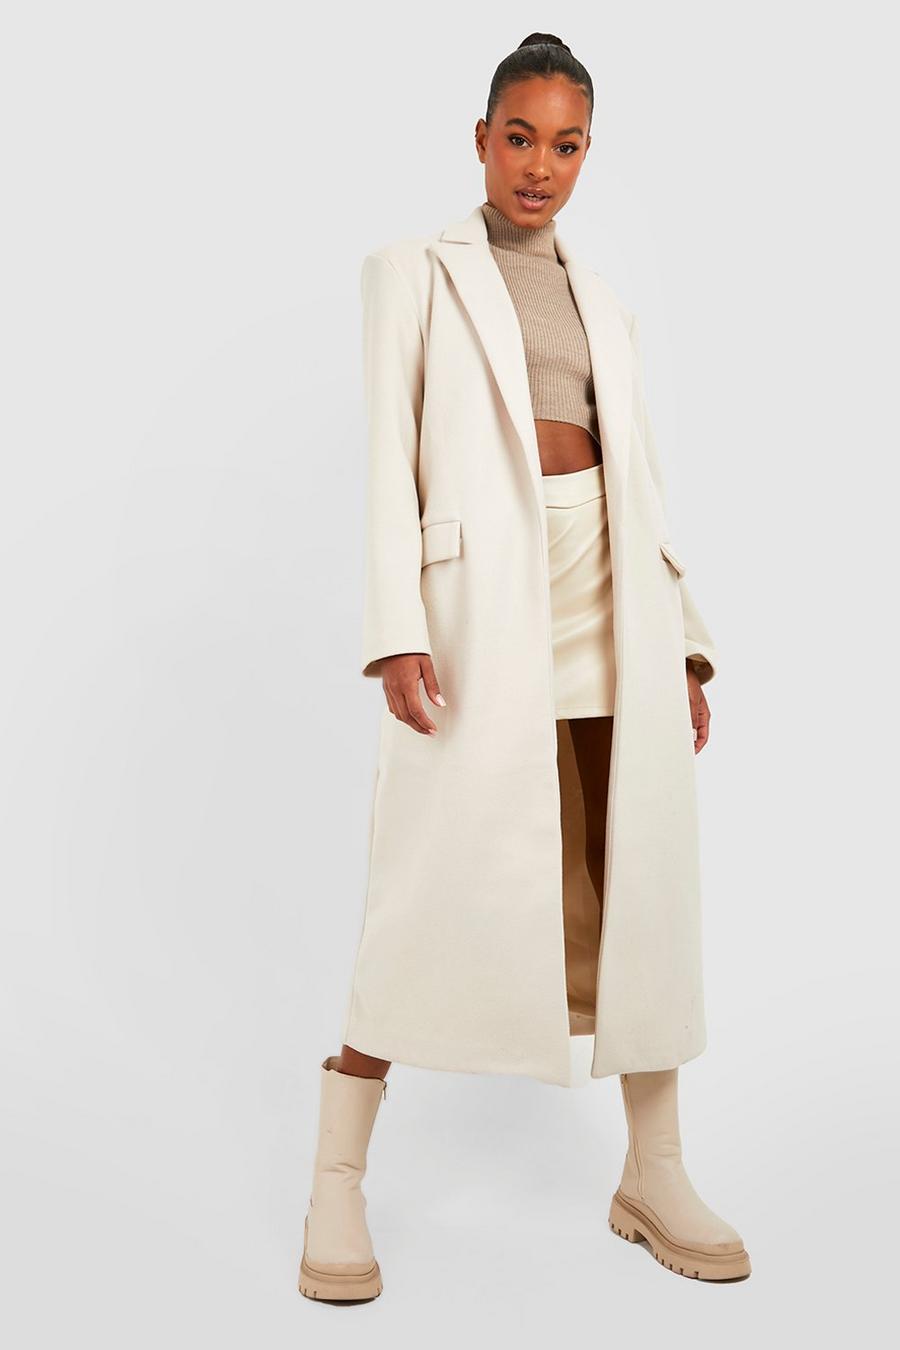 Stone Tall Oversized Wool Look Duster Coat